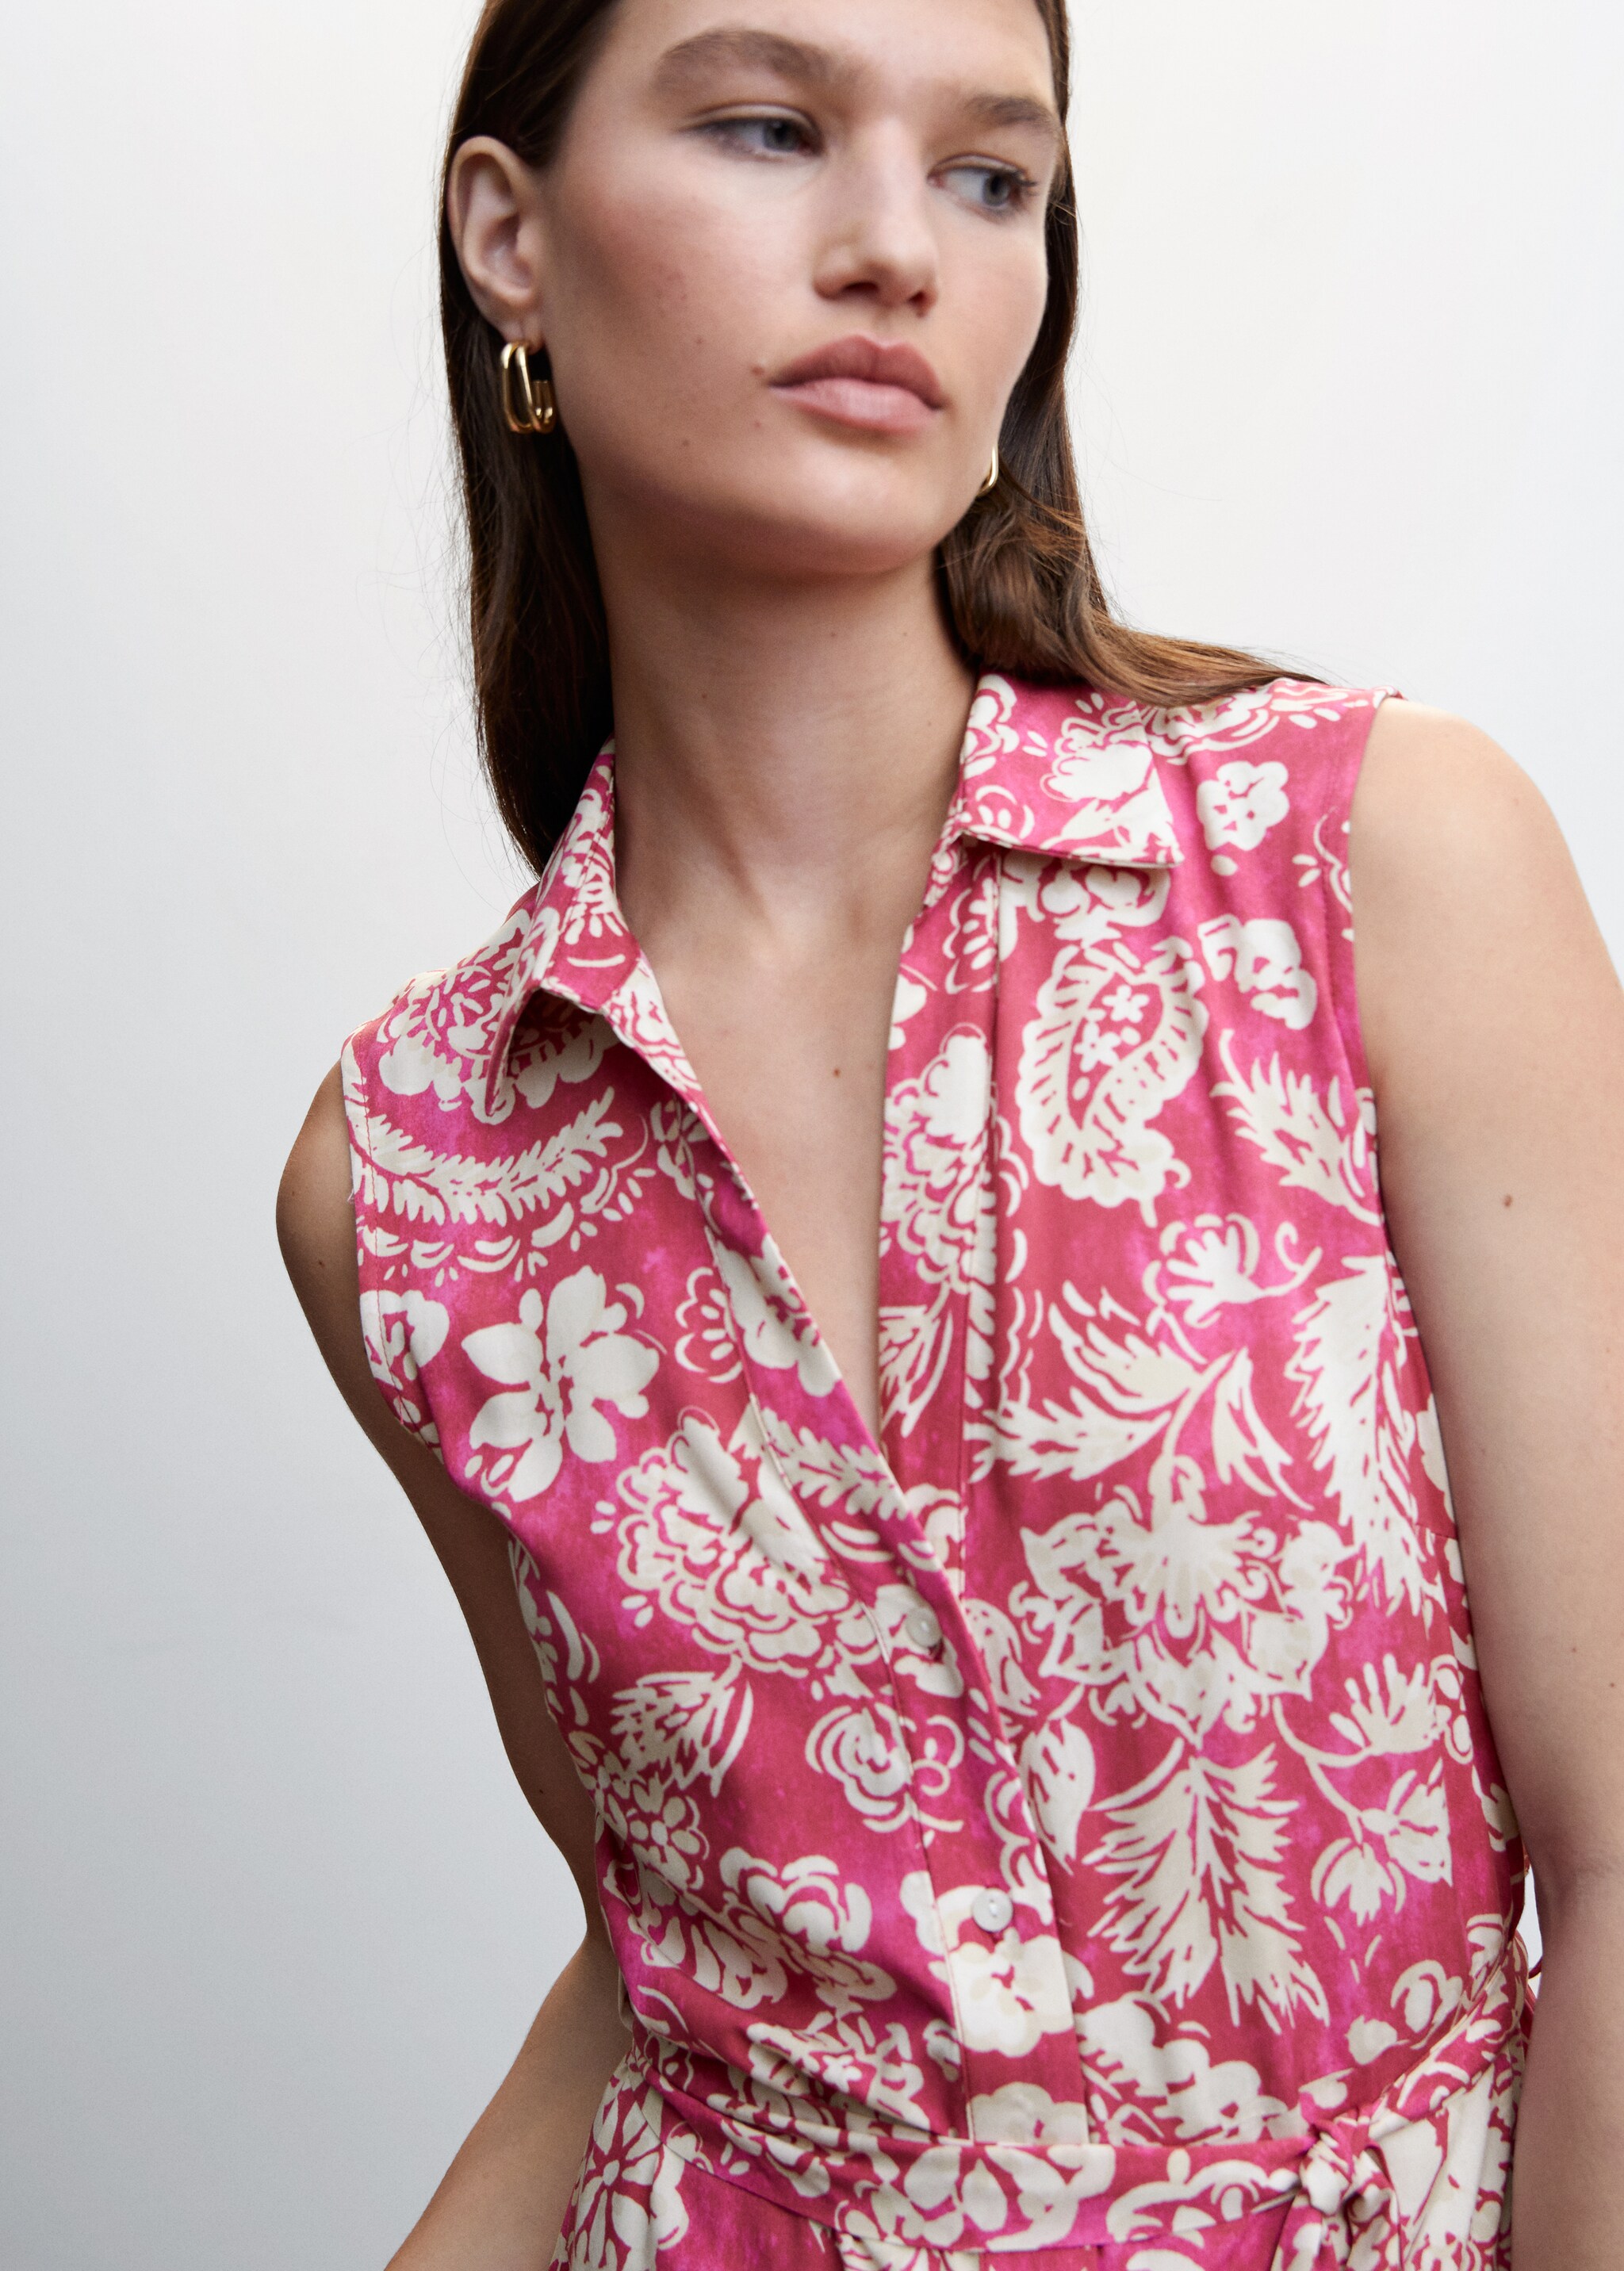 Floral shirt dress - Details of the article 1